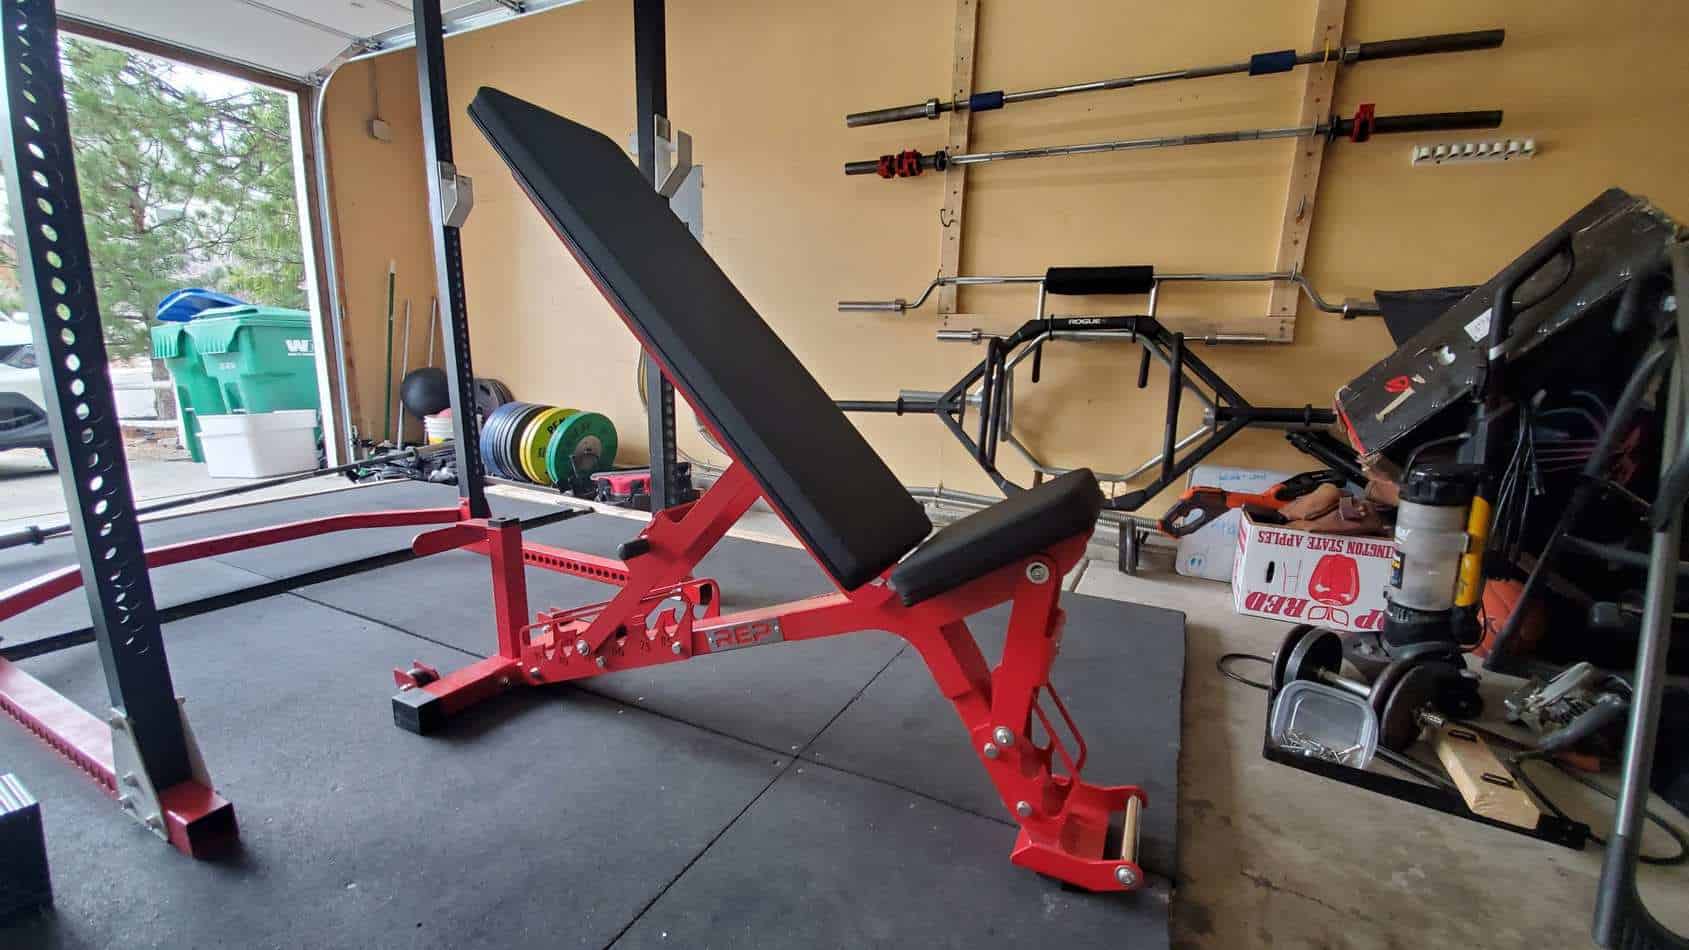 REP AB-5200 Review – Best Value Adjustable Bench On The Market!